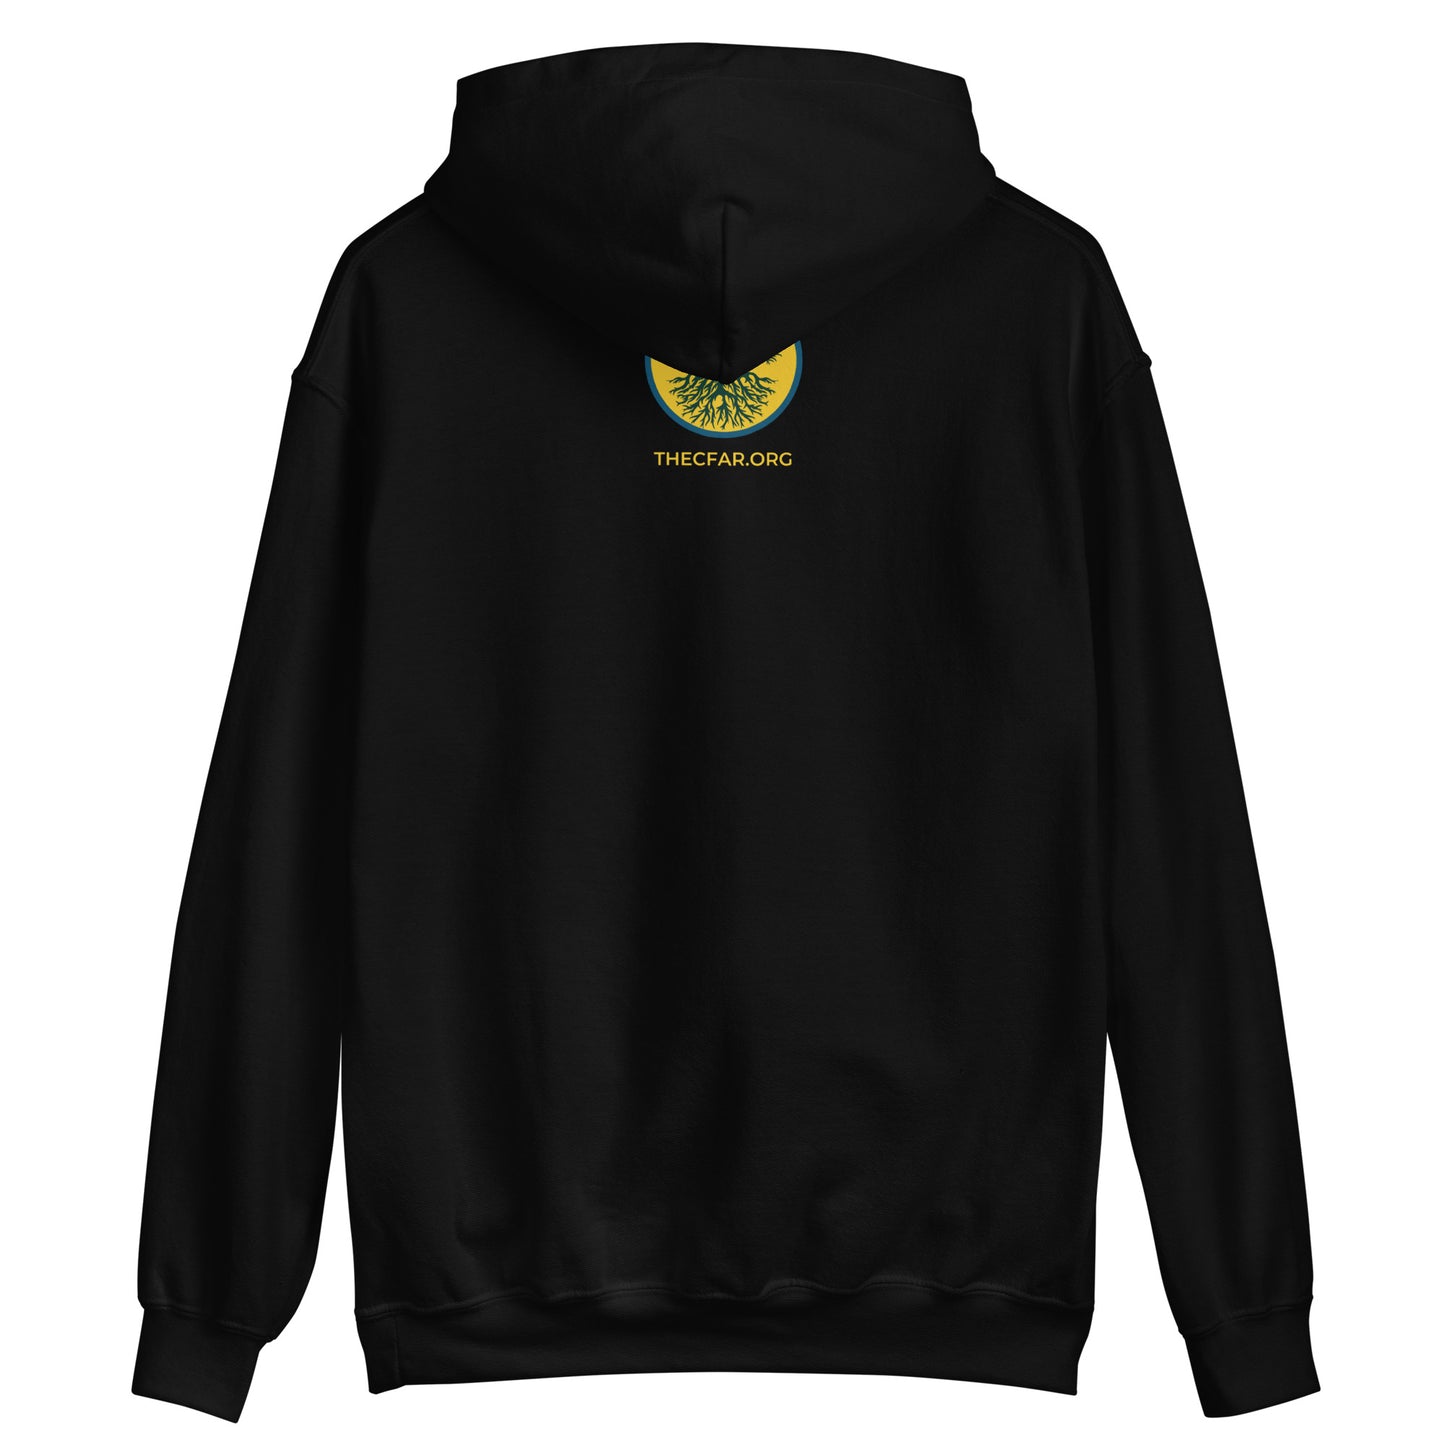 Rooted in Regeneration - Floral Roots Hoodie